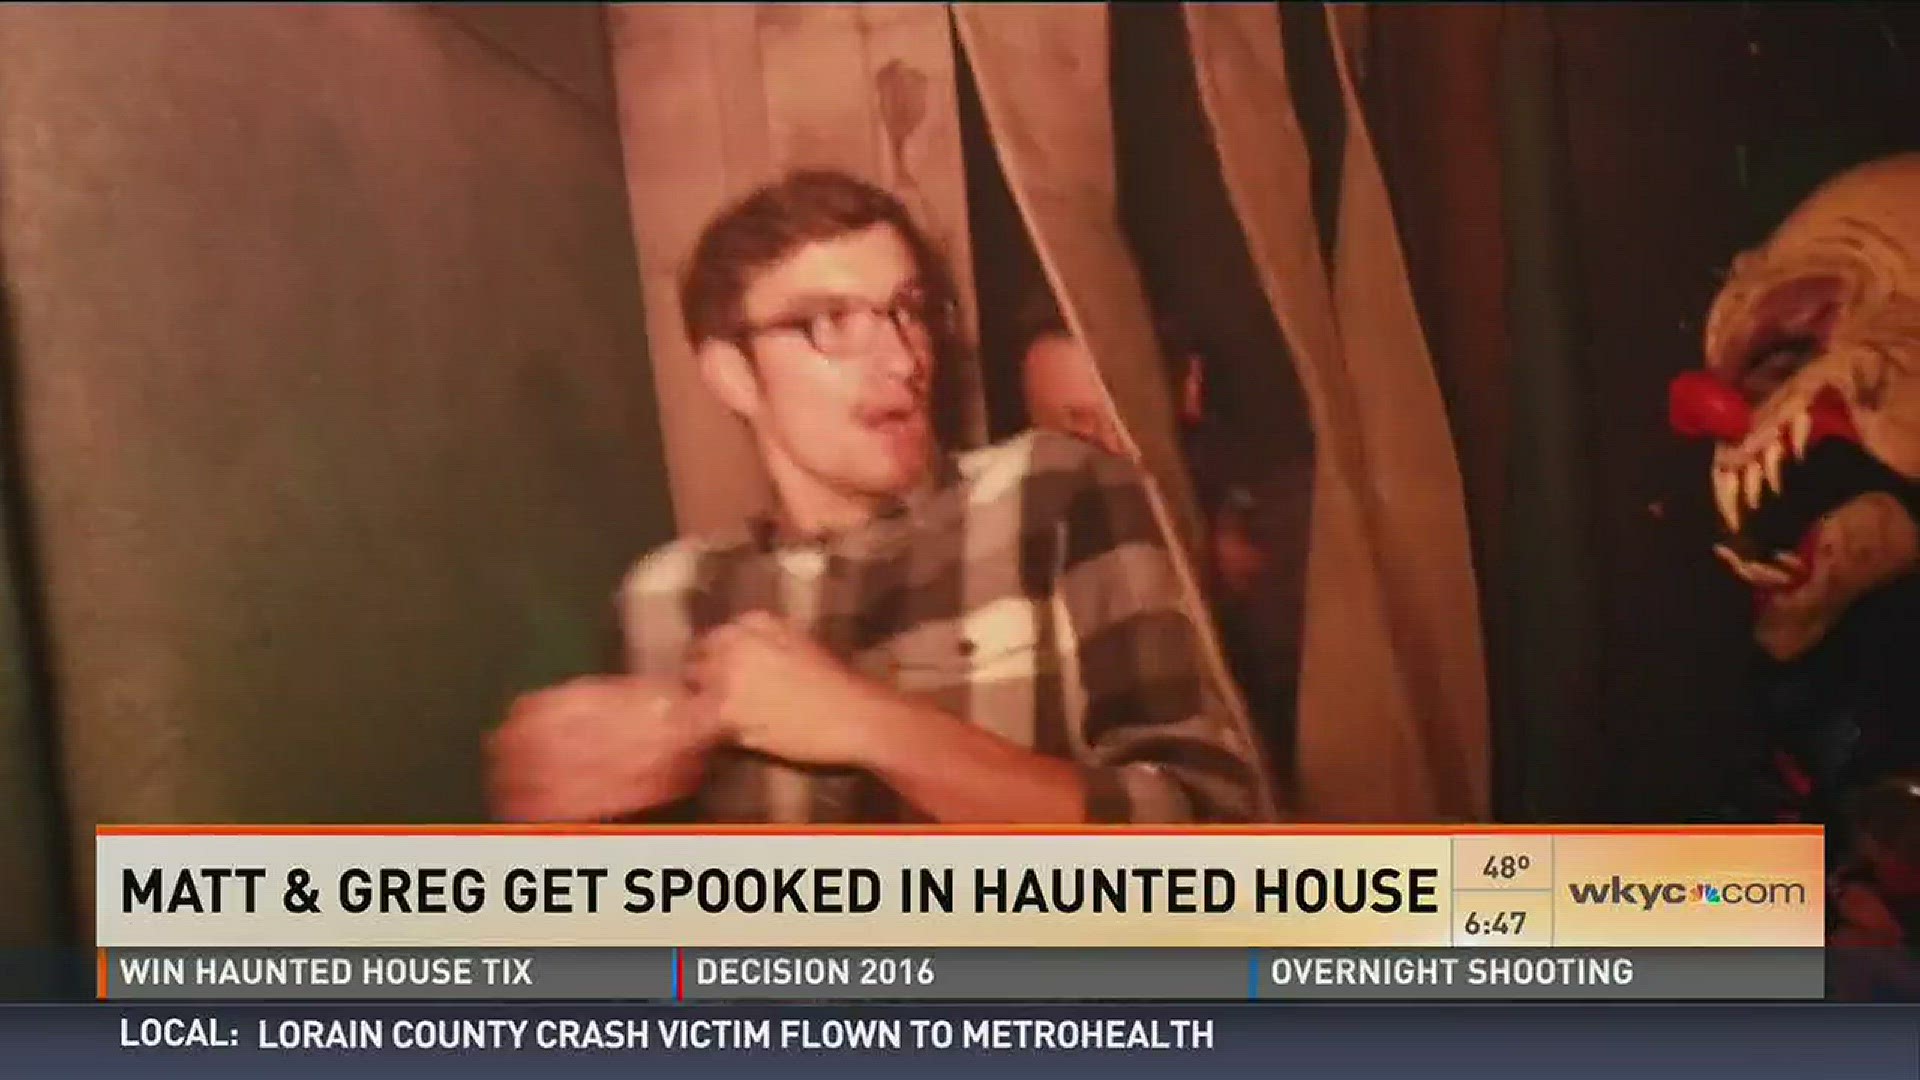 Oct. 27, 2016: See what happens when intern Kody gets scared by monsters from Akron's Haunted Schoolhouse and Haunted Laboratory on live TV.